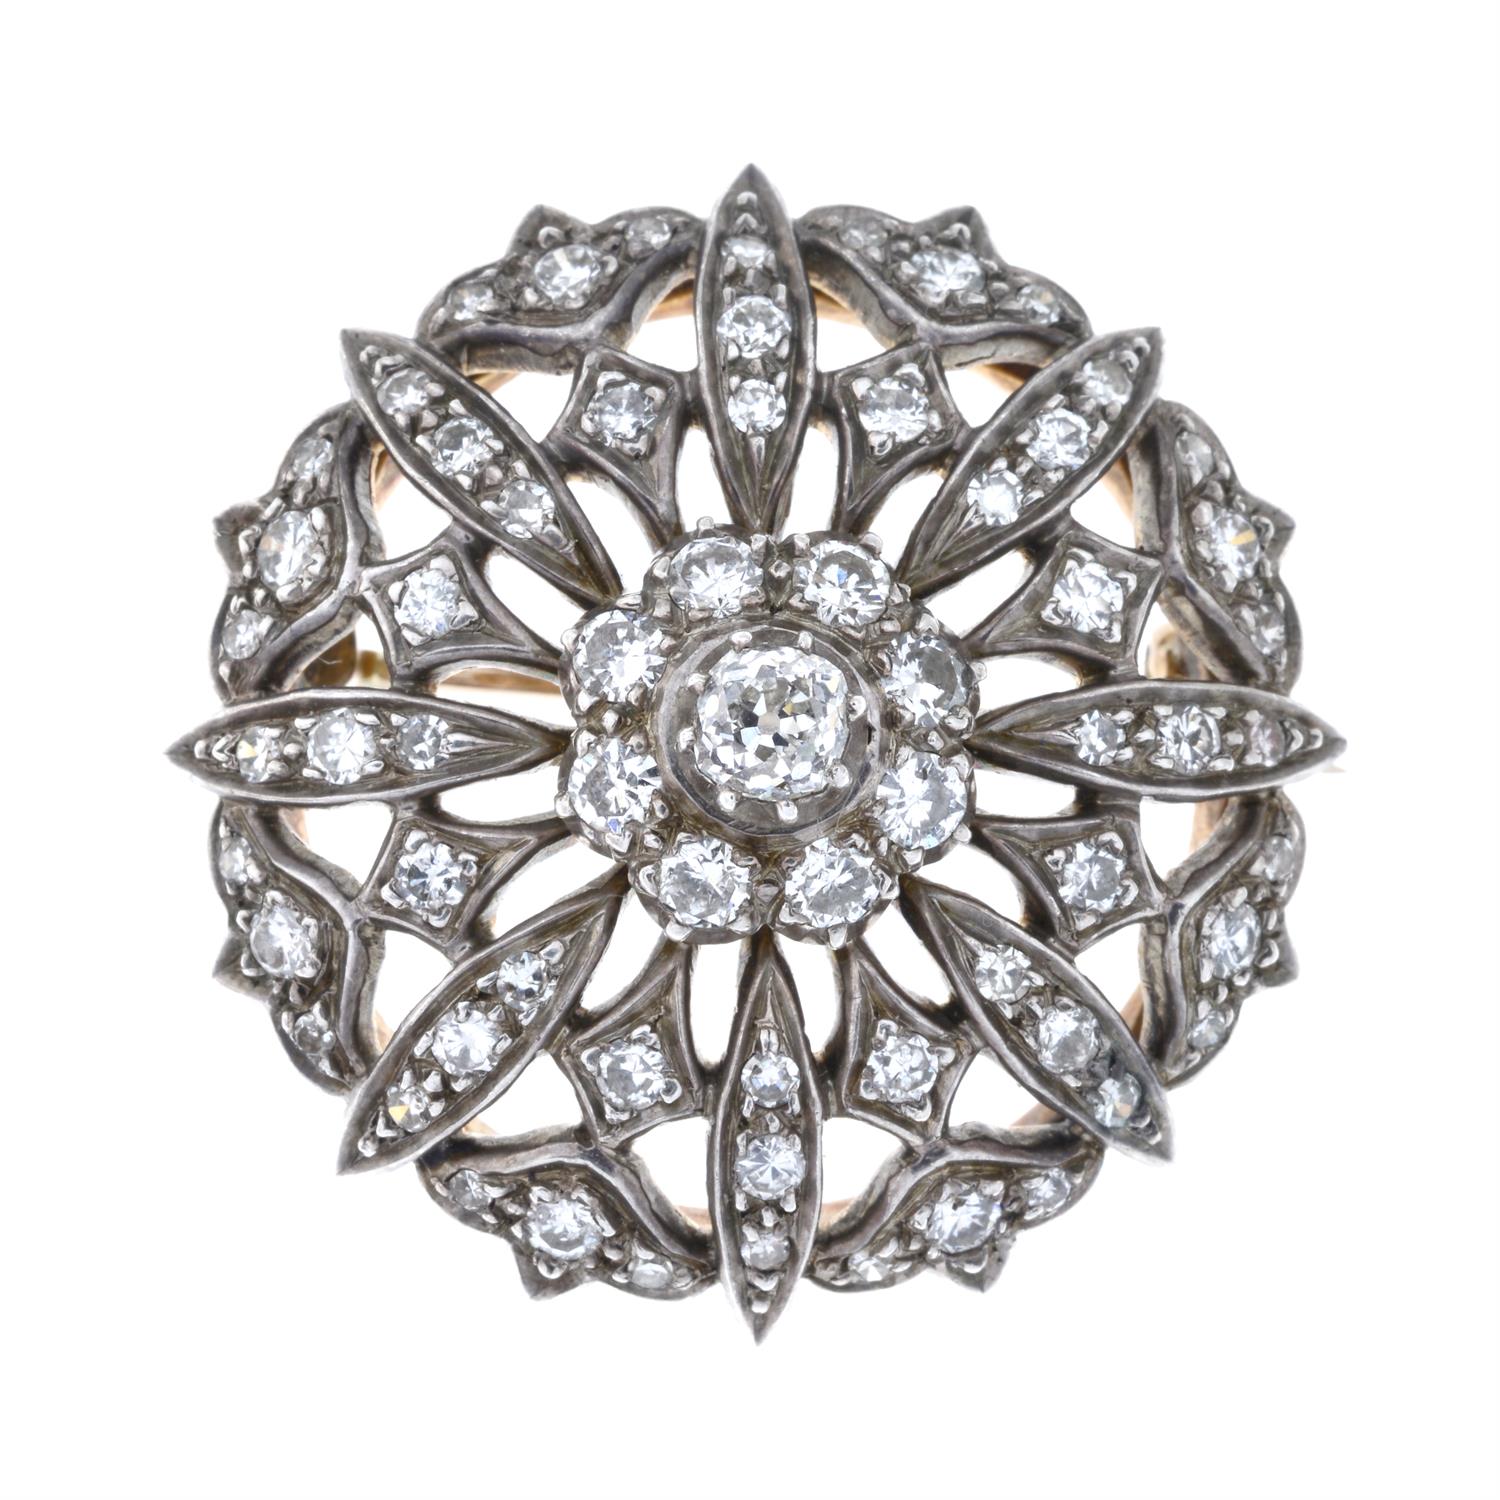 Late Victorian silver and gold diamond brooch - Image 2 of 3